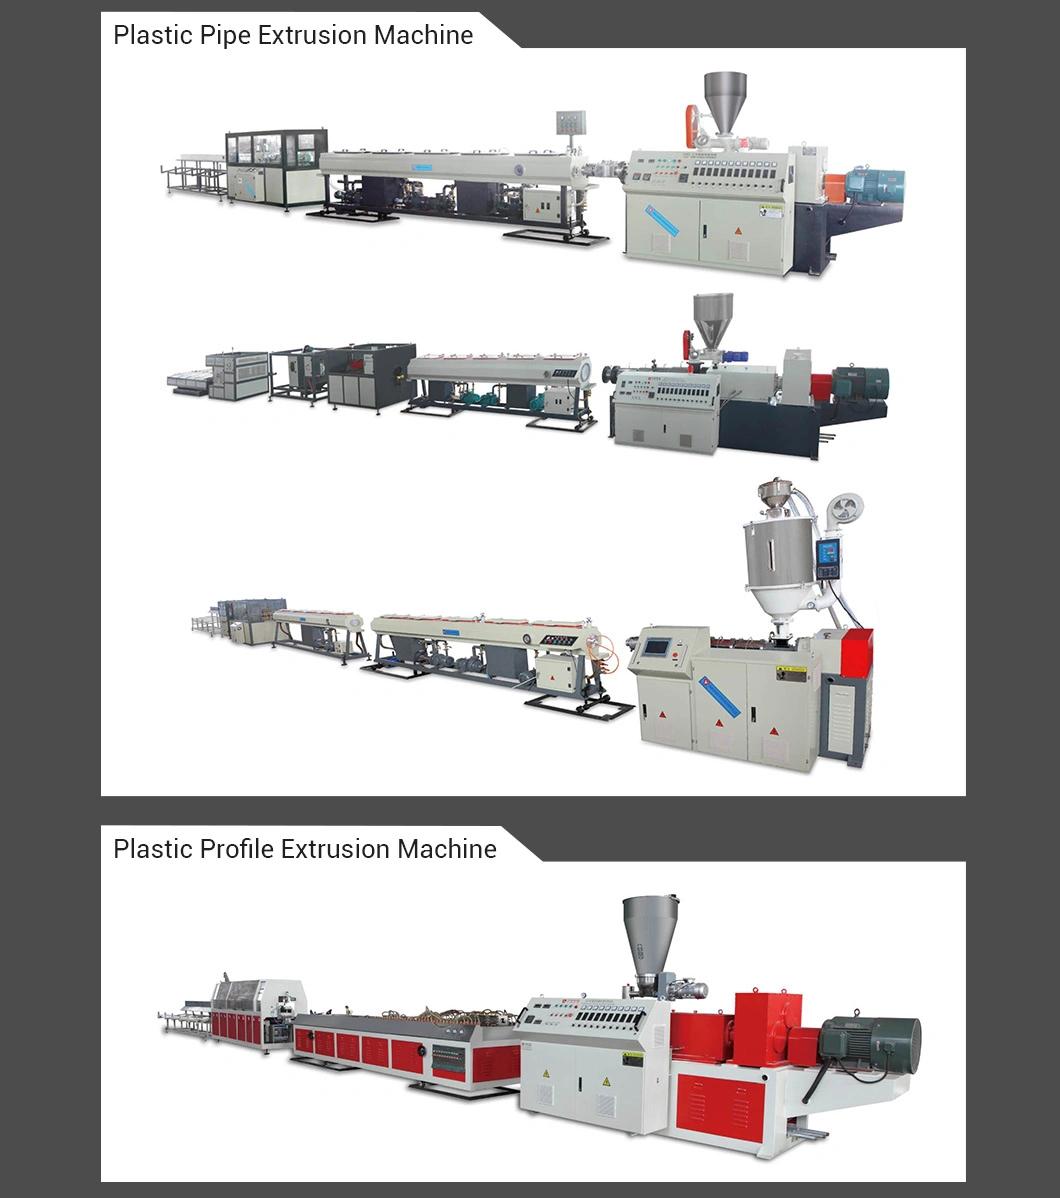 Yatong Pipe Screw Extruder Machine with Film Packing